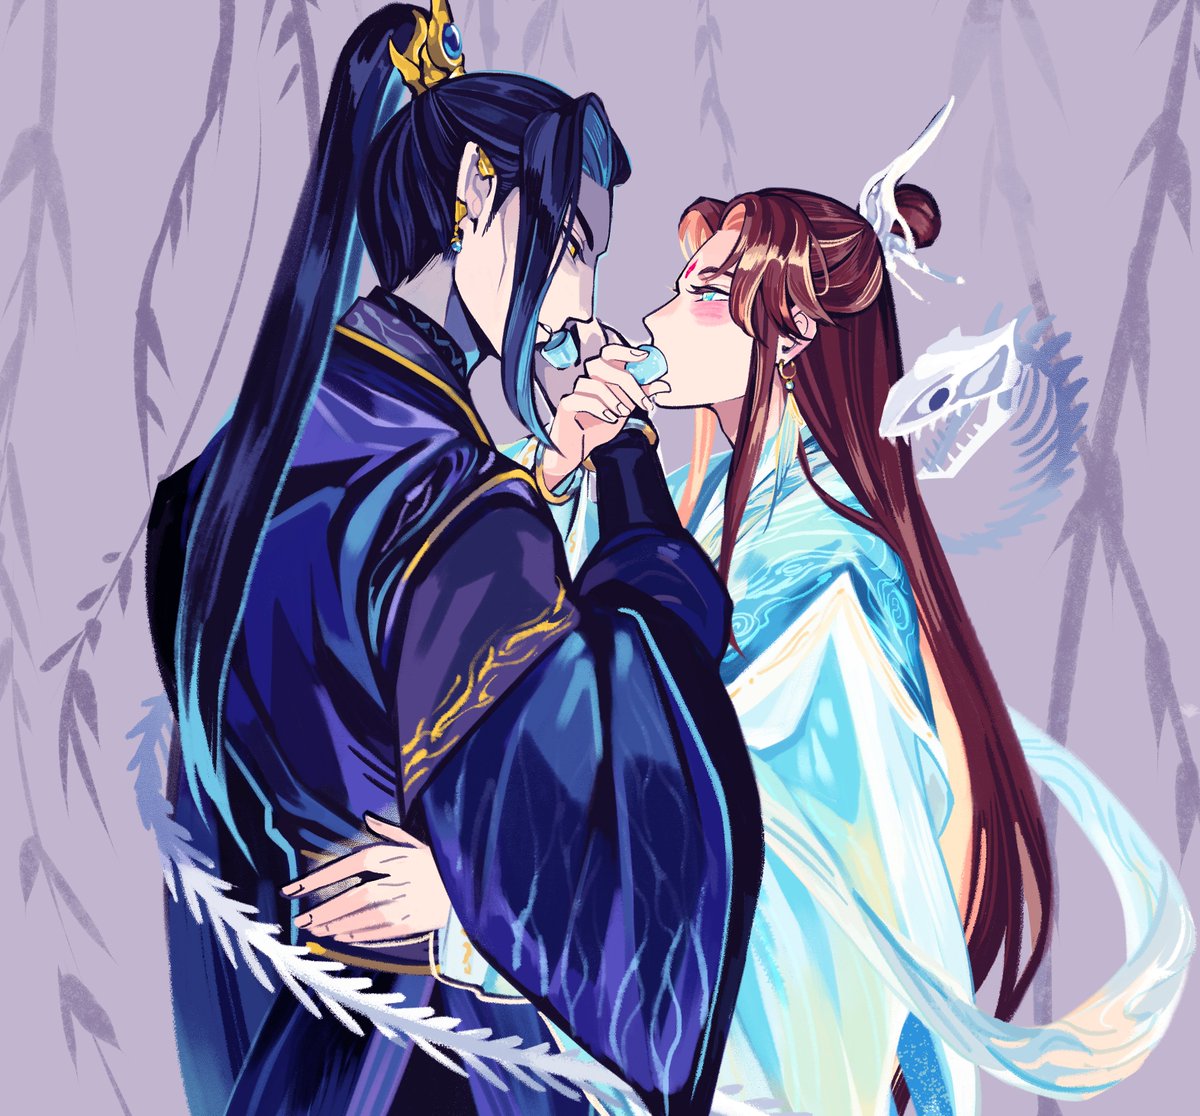 RT @soursoppi: [TGCF . Beefleaf]

a cup from me to you https://t.co/Qcnwht6dsq